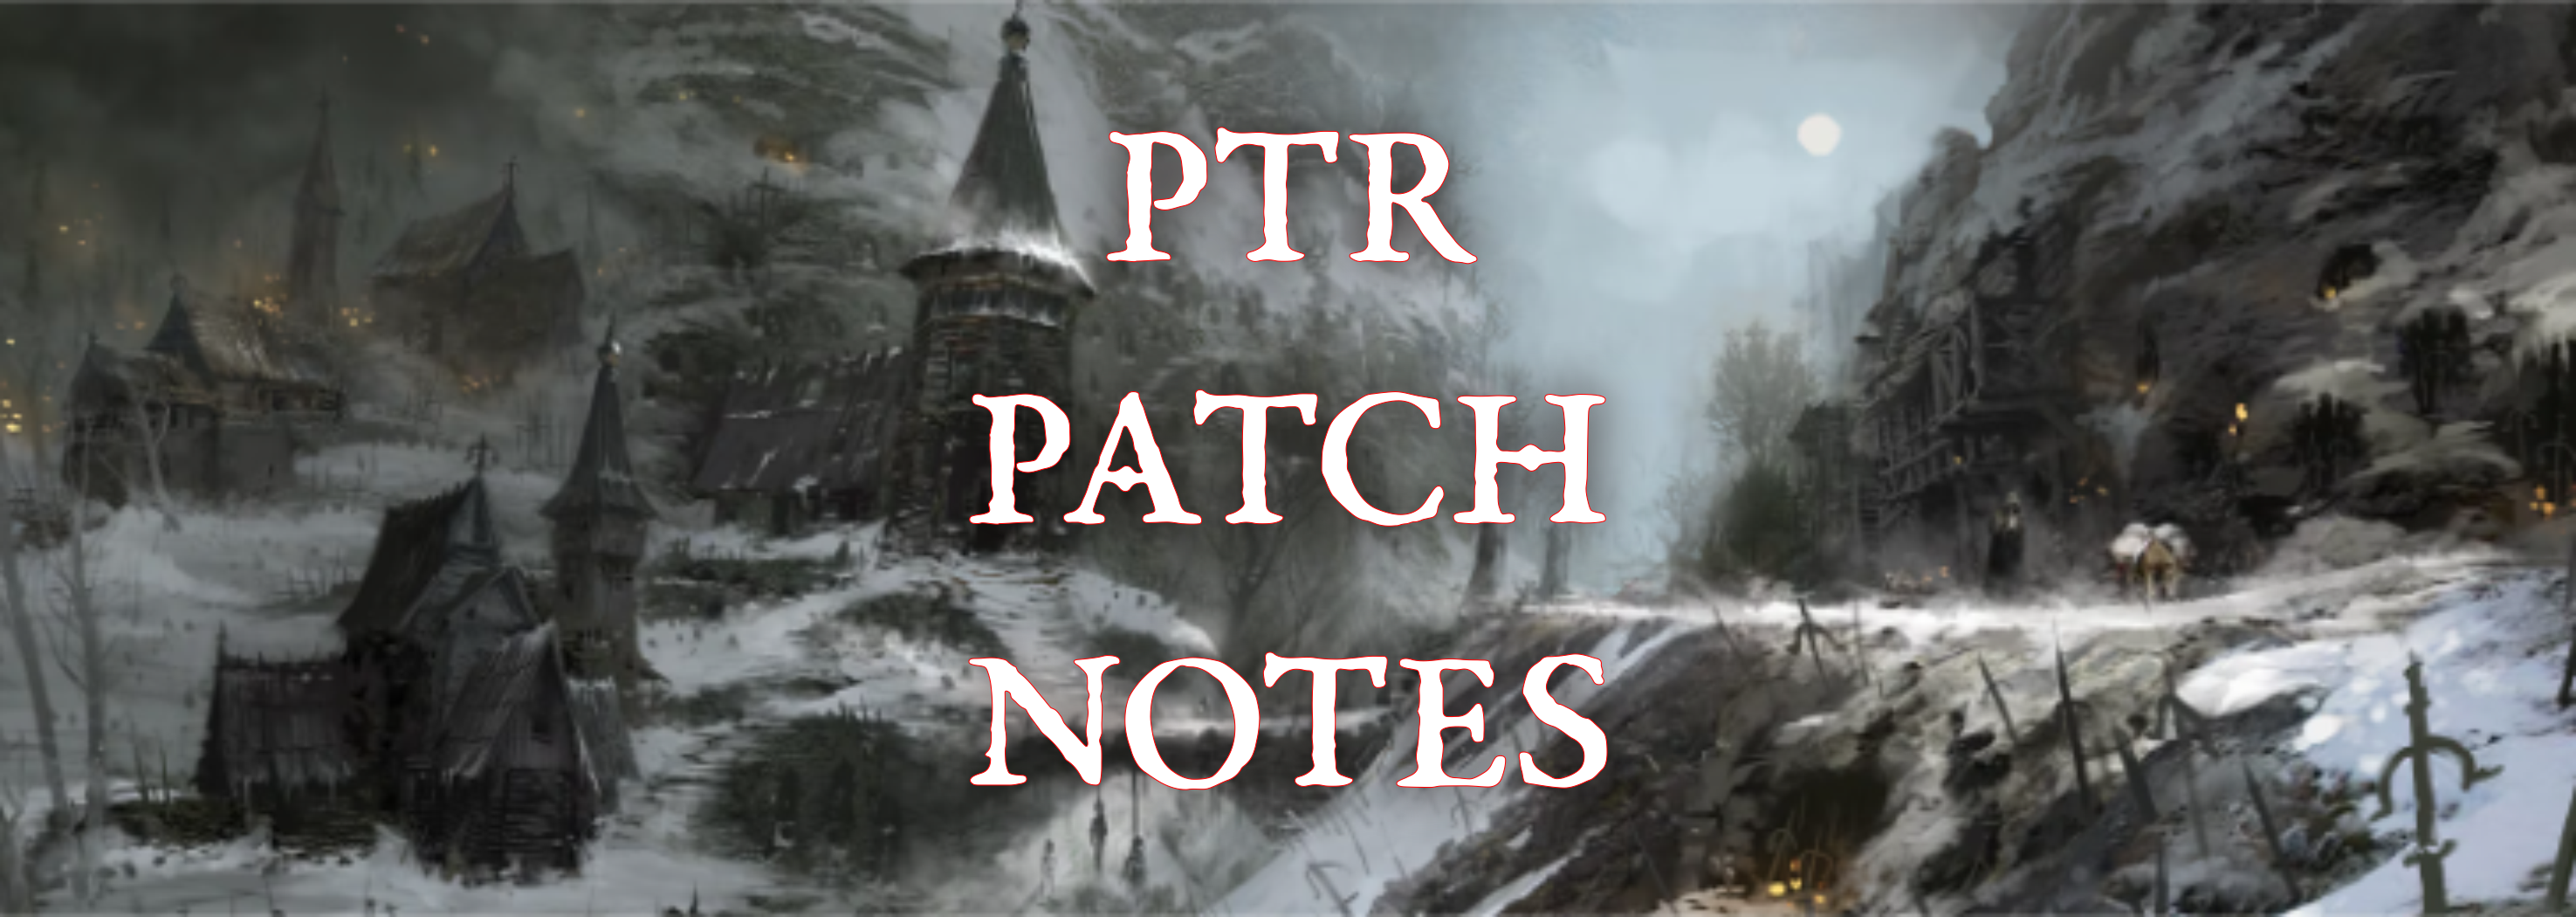 PTR Patch Notes